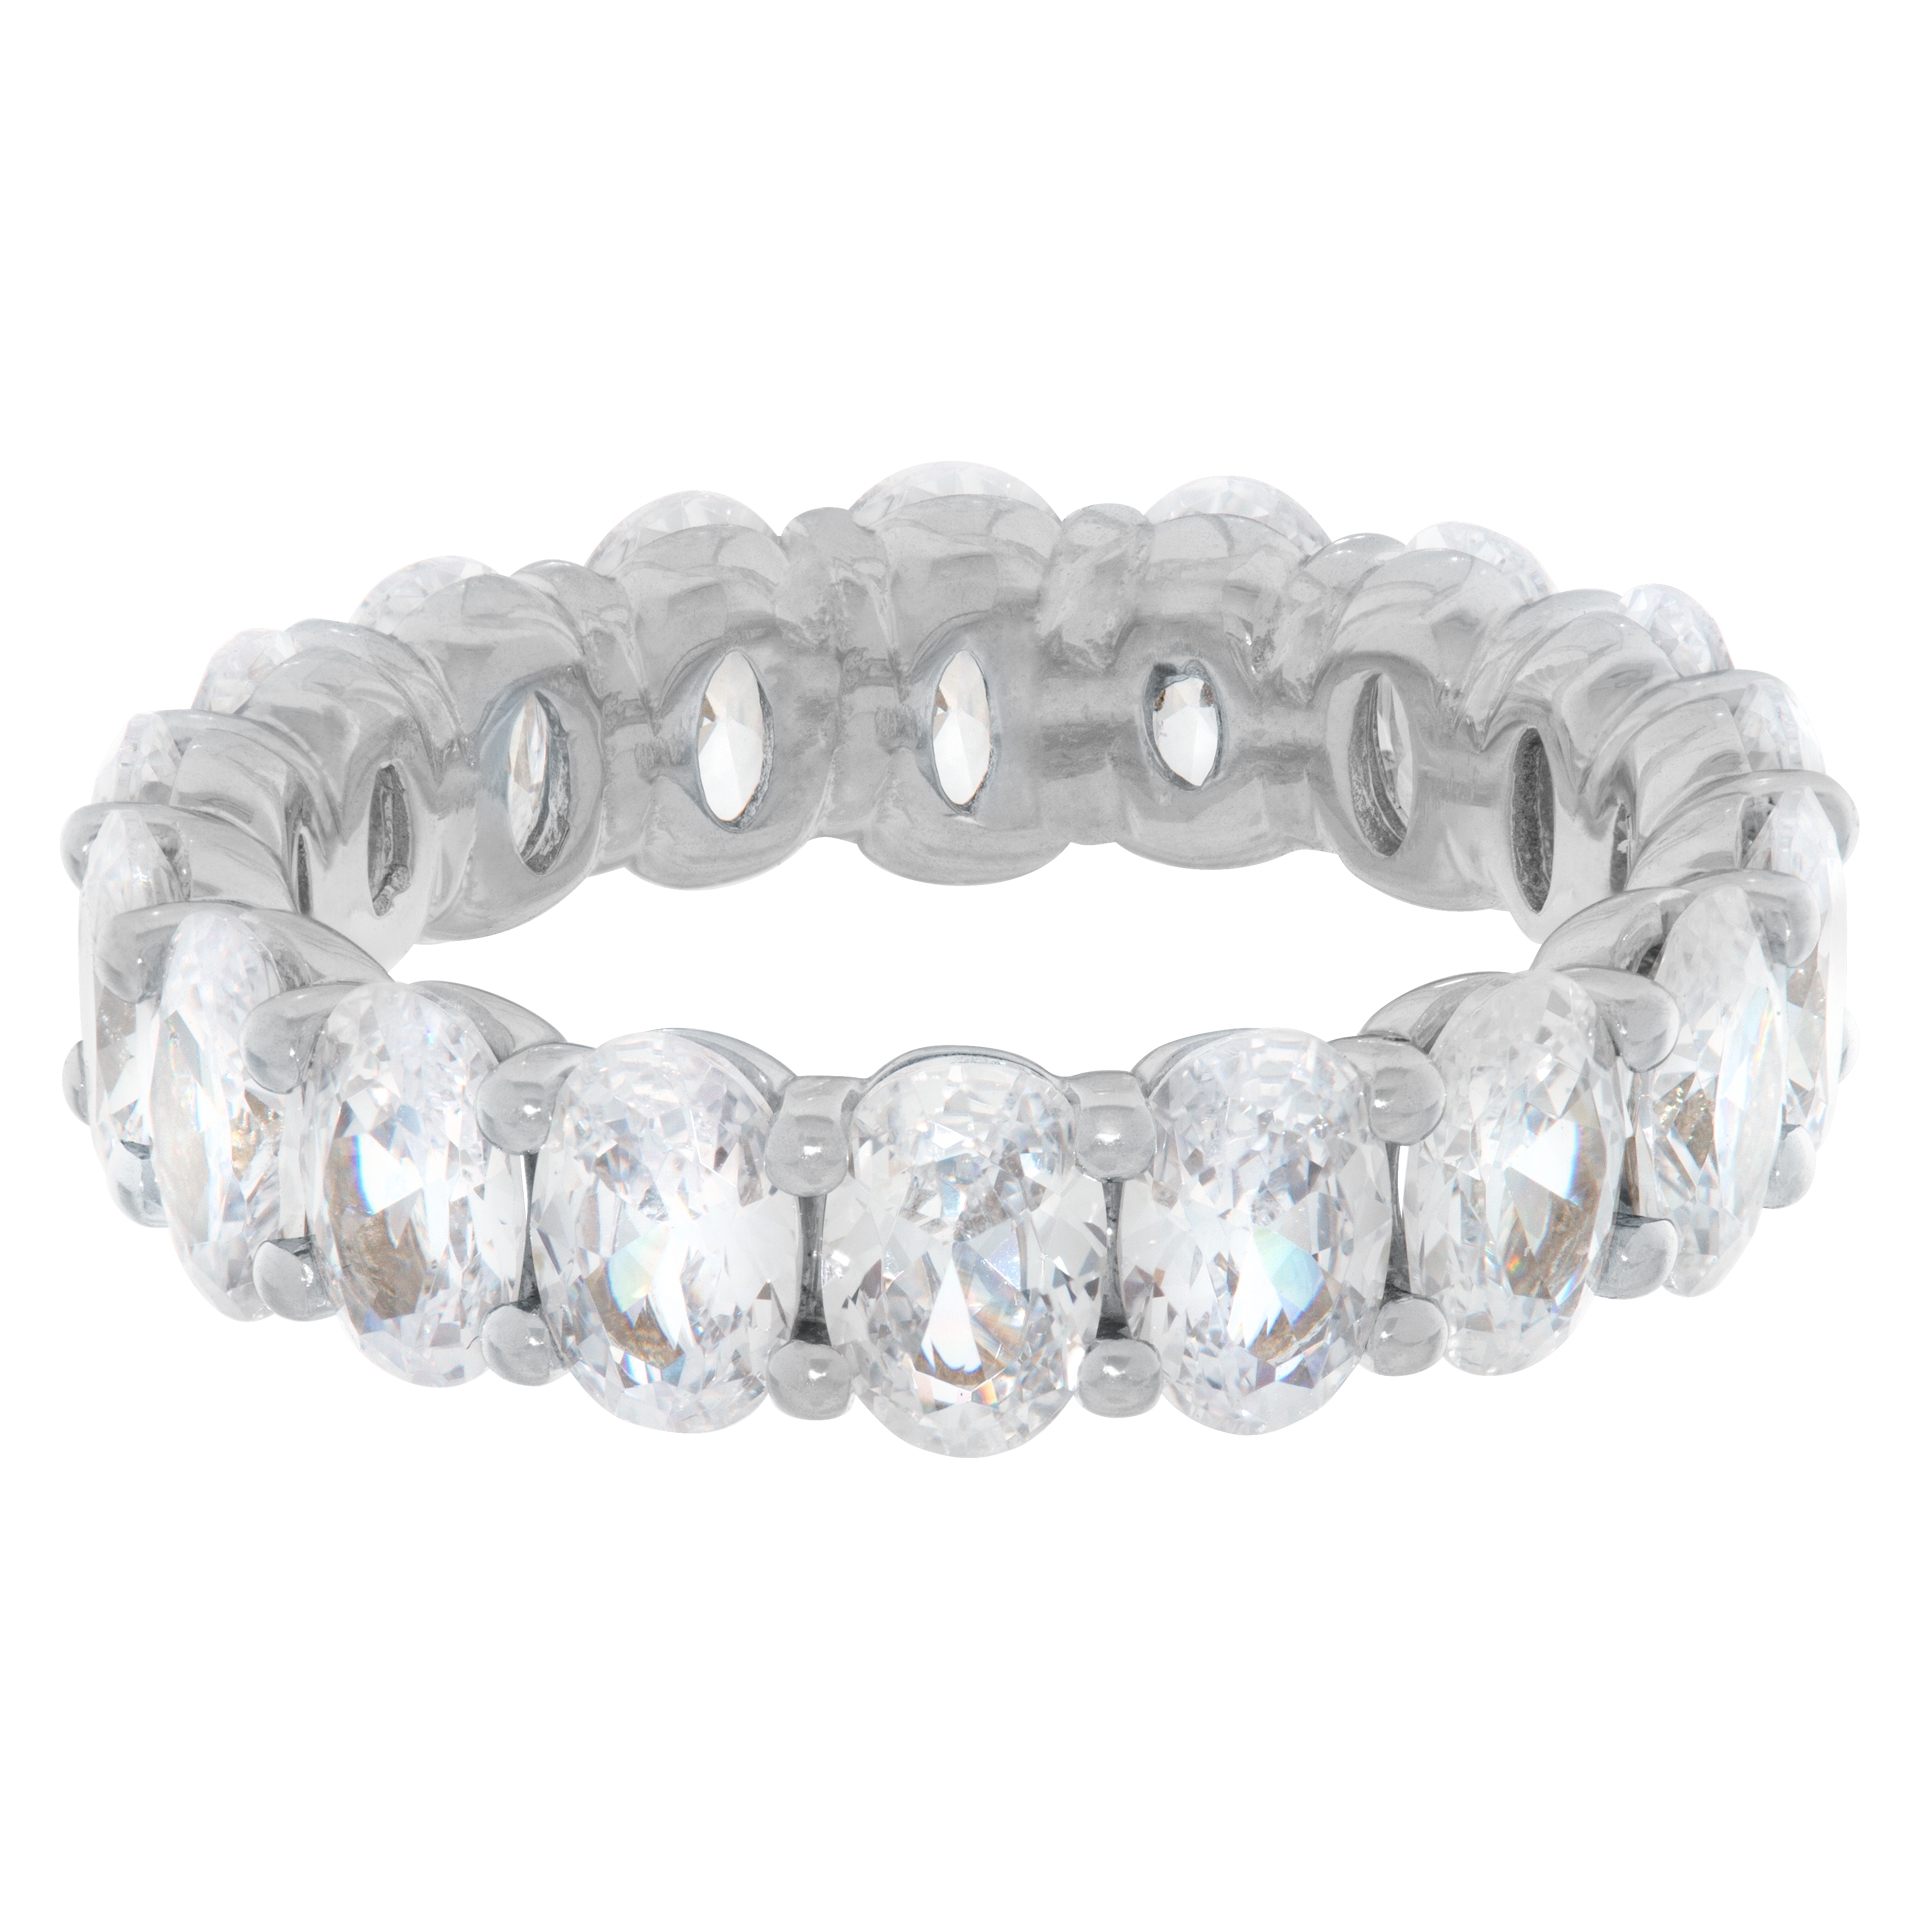 5.5ct Oval Cut Diamond eternity band and ring